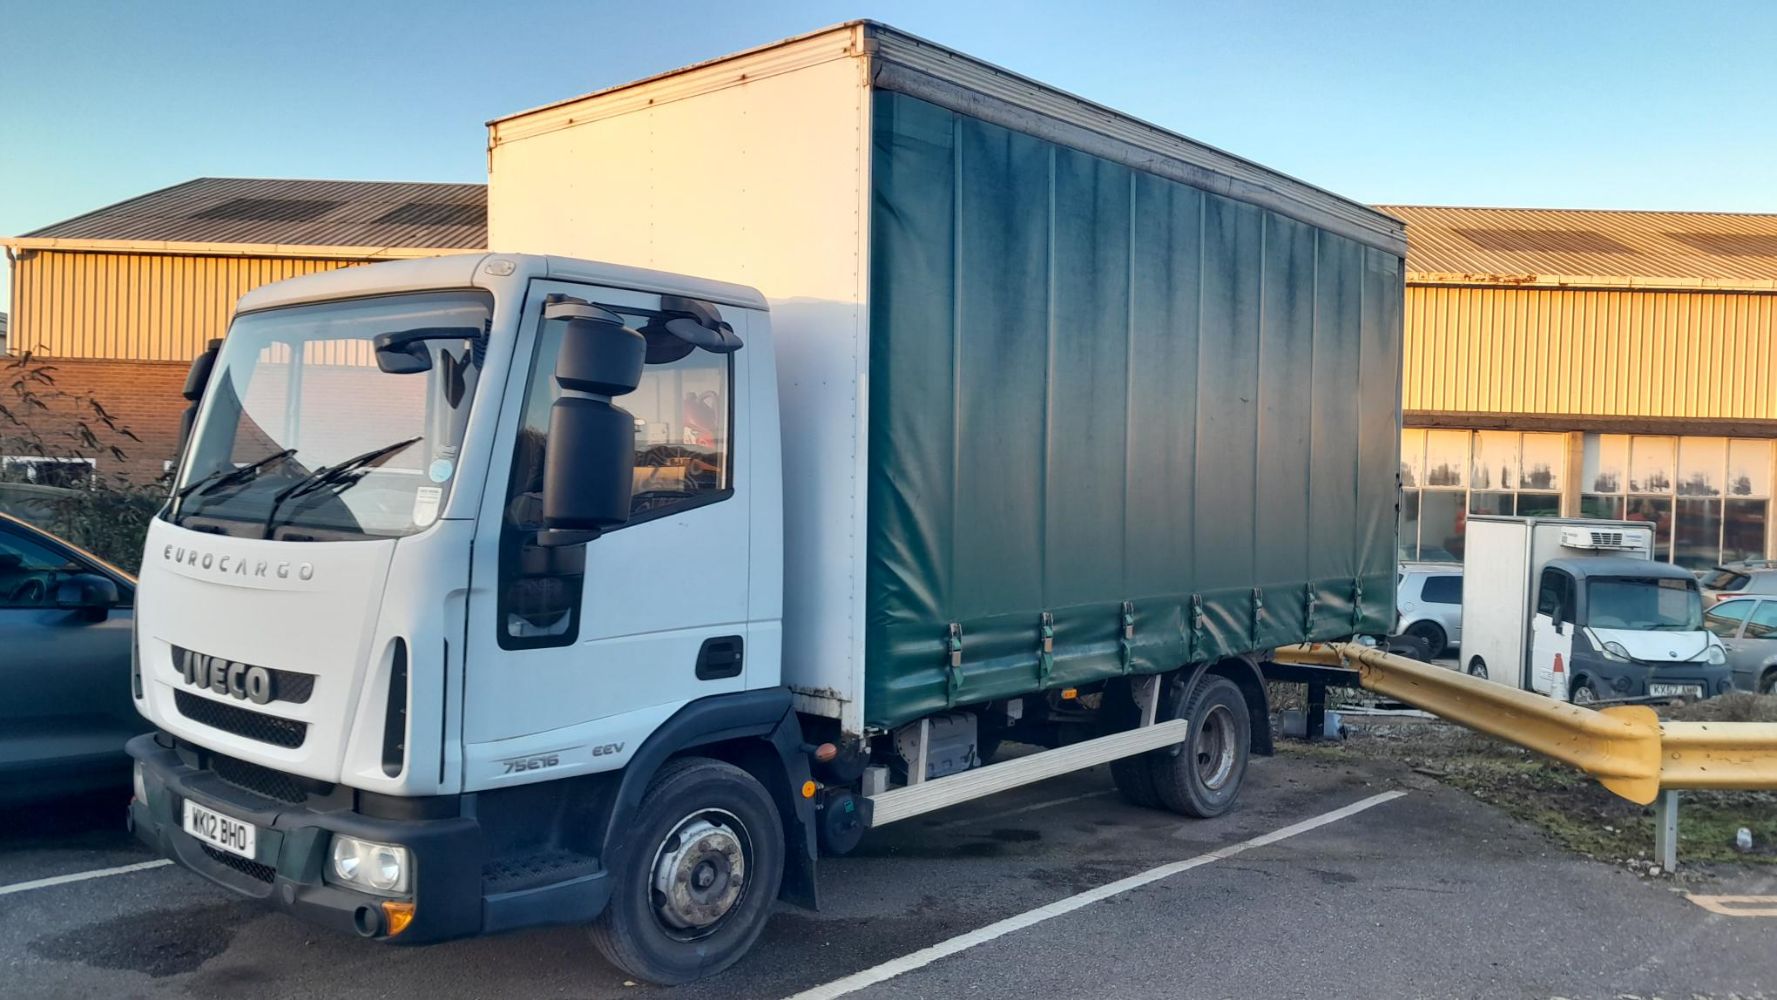 Short Notice HGV Sale to include Iveco 7.5T Curtainsider Auto (2012), 3 x Mercedes Axor 18T Curtainsiders (2013/08) & Mercedes 7.5T Curtainsider